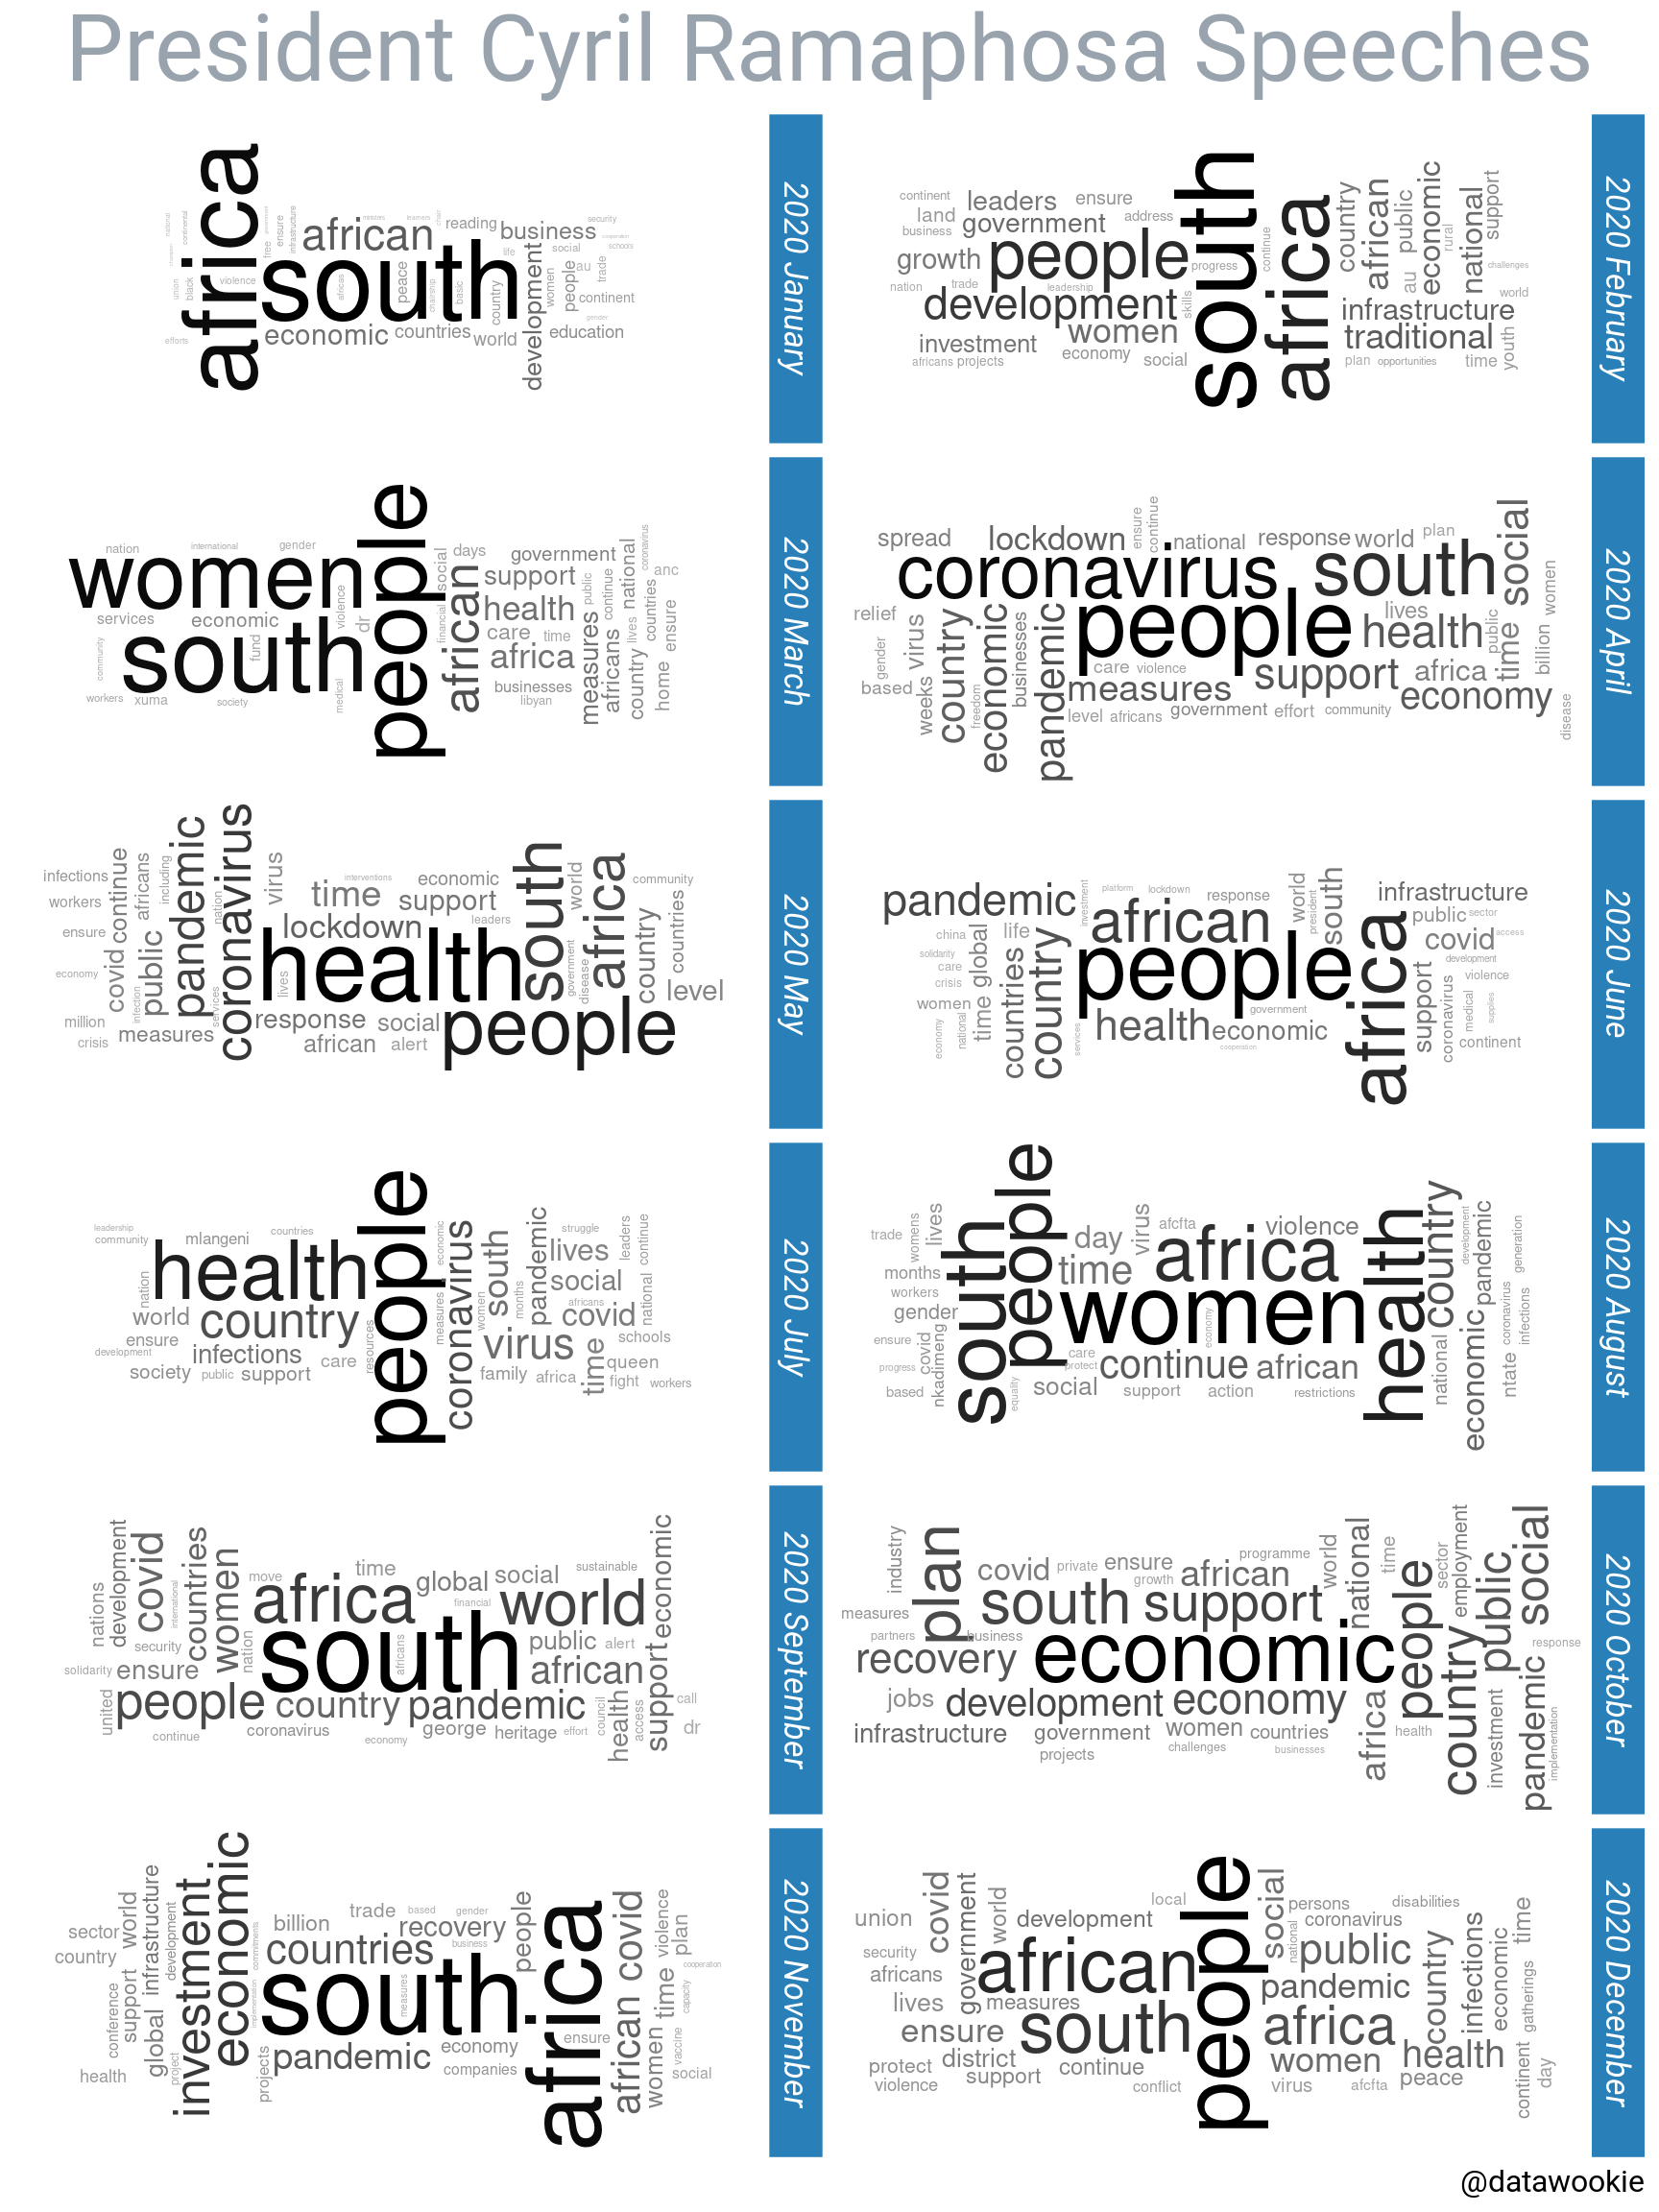 Word cloud showing word frequency in Cyril Ramaphosa's speeches broken down by month in 2020.